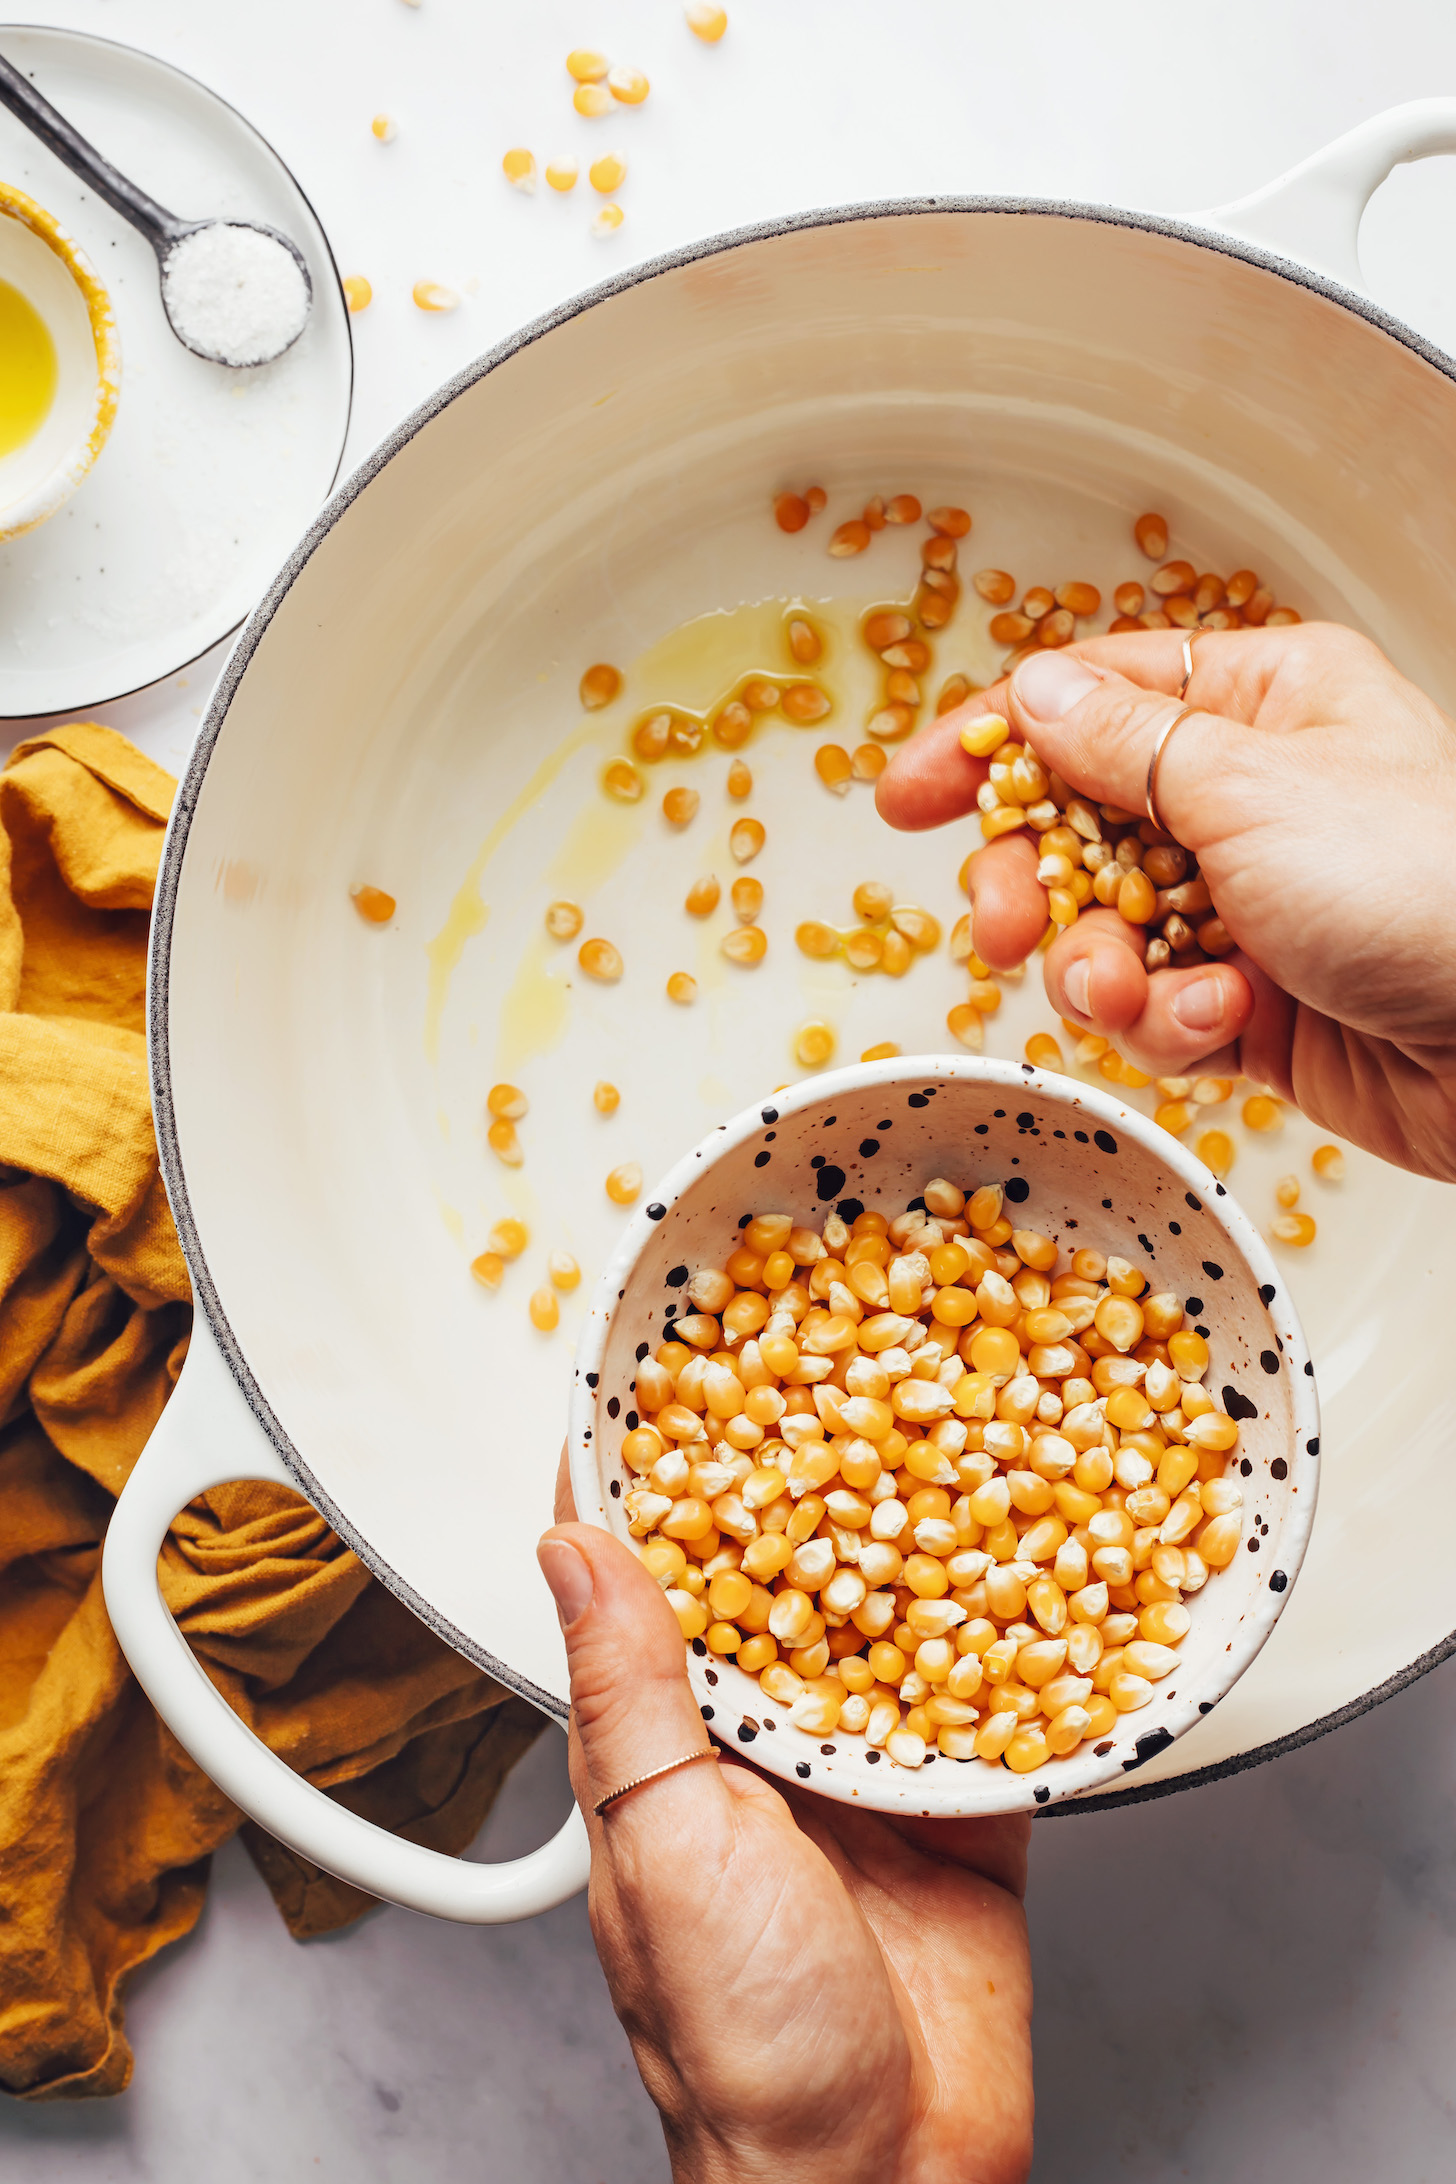 Adding dry popcorn kernels to a pot of warm oil